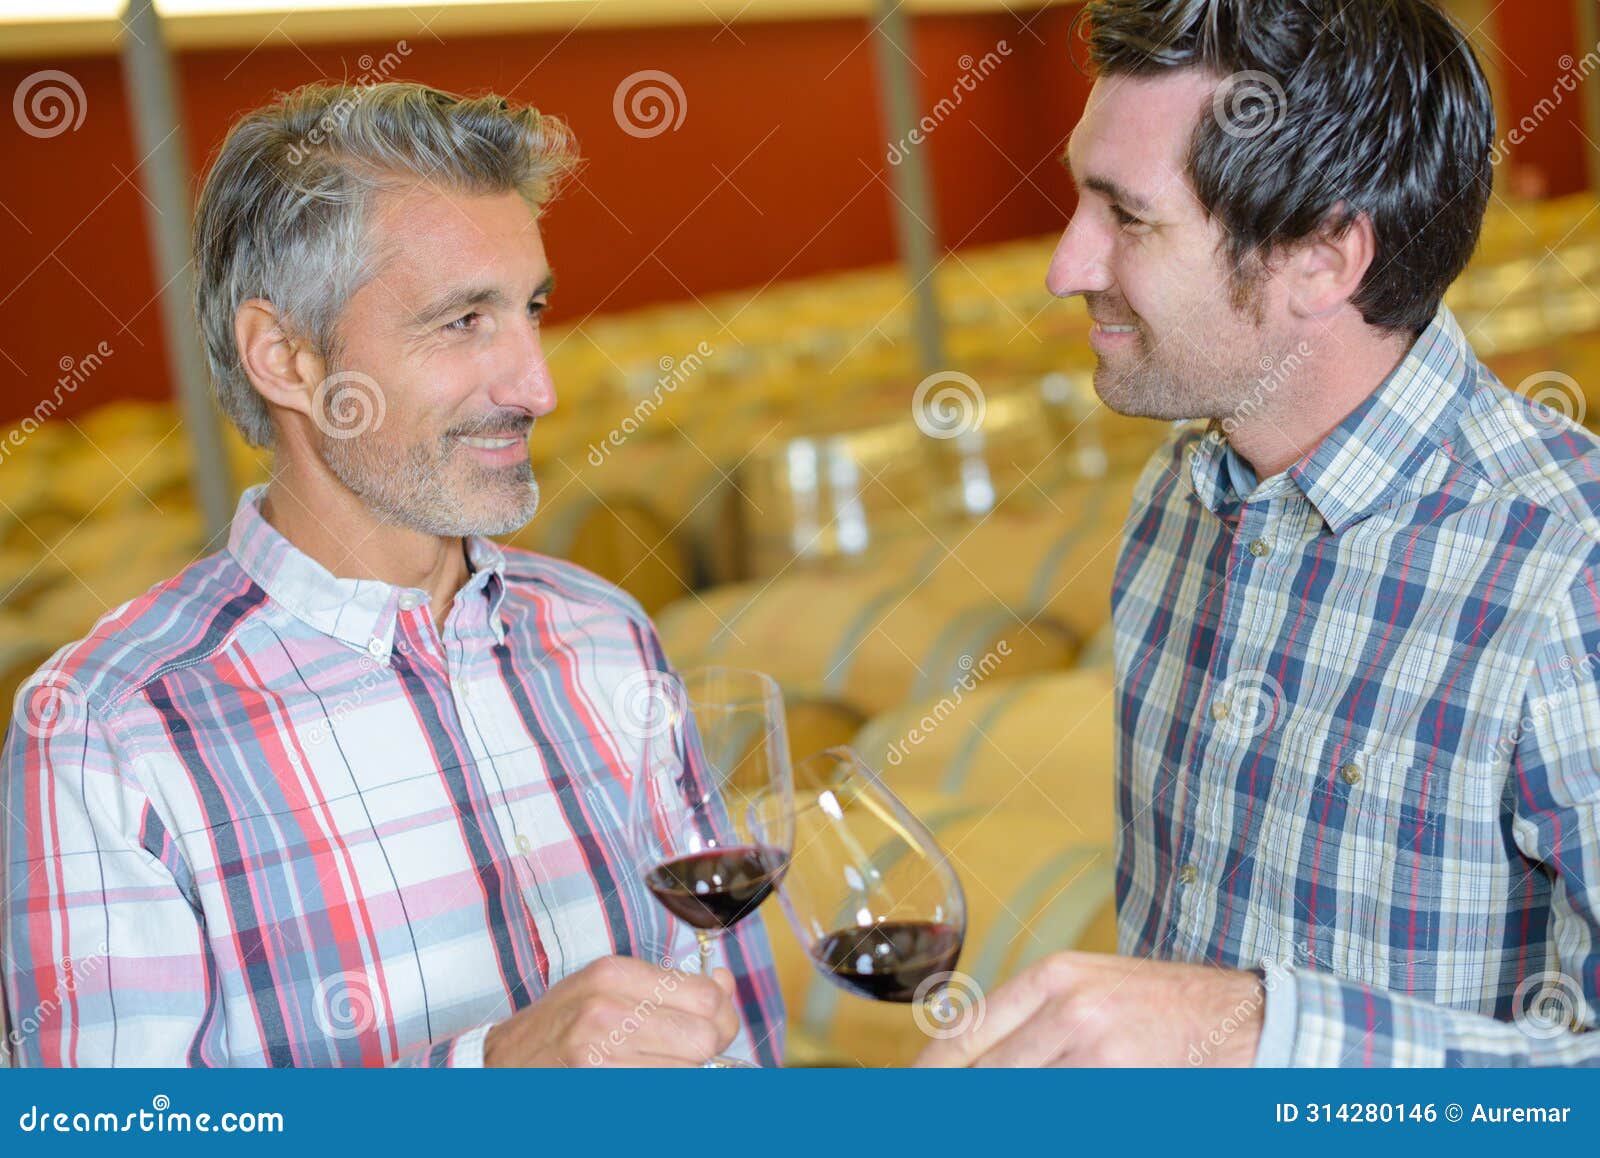 two male winemakers tasting wine in glass in winery cellar